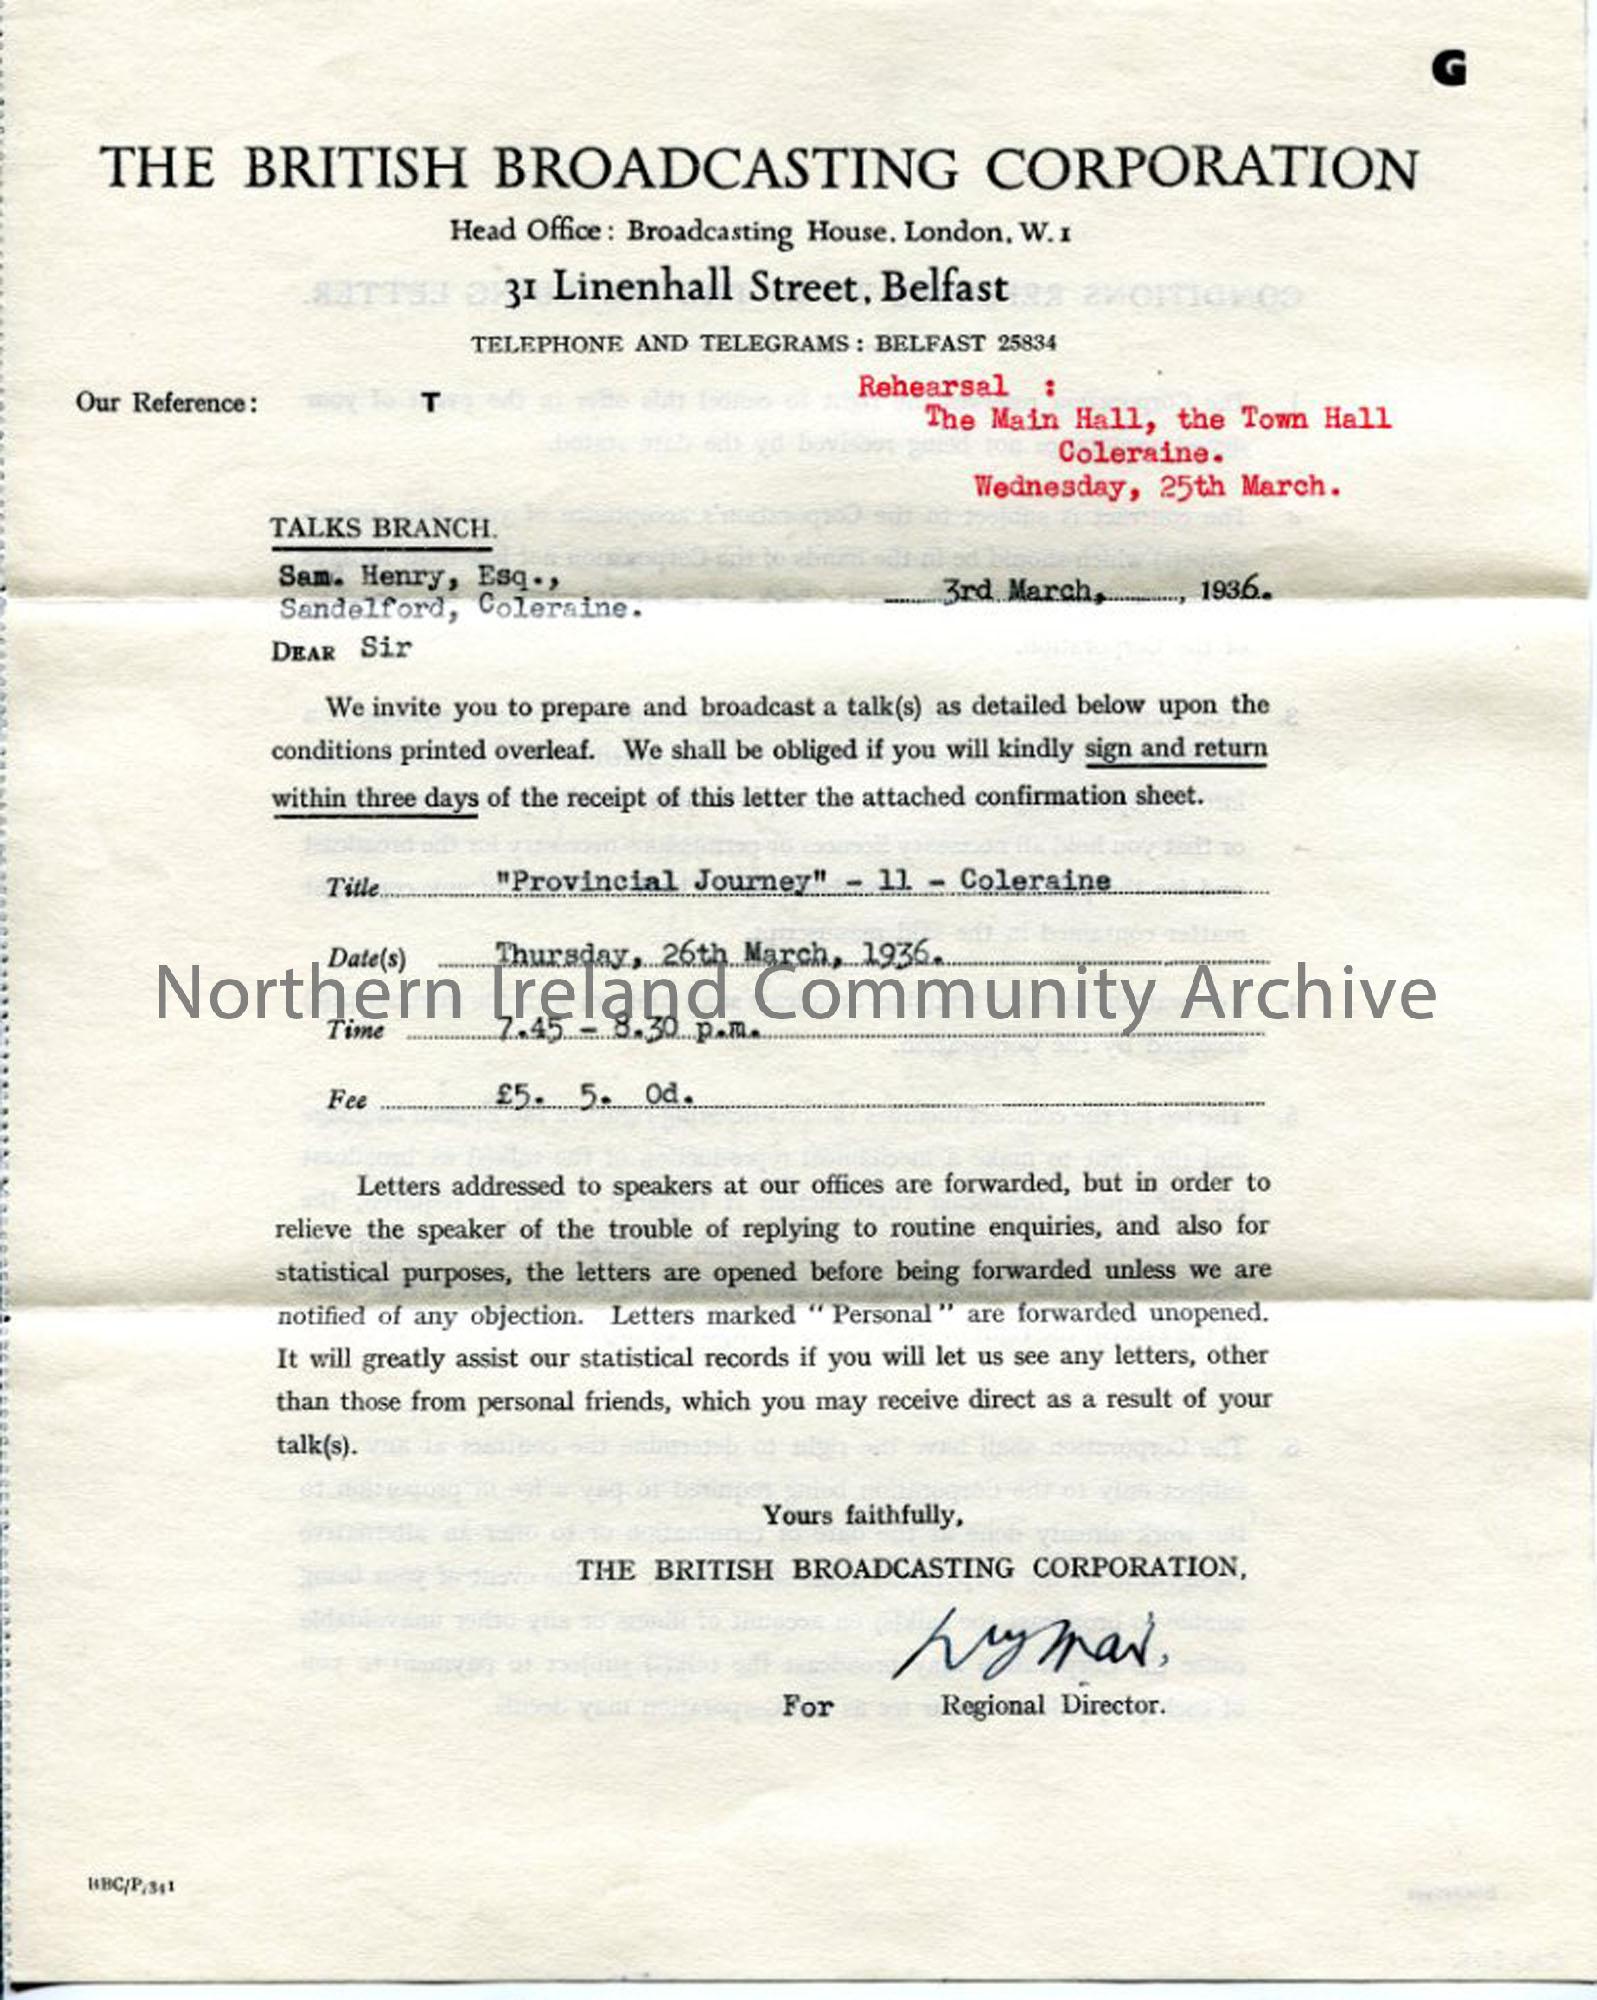 Letter/Contract from the Regional Director of the BBC, dated 3.3.1936